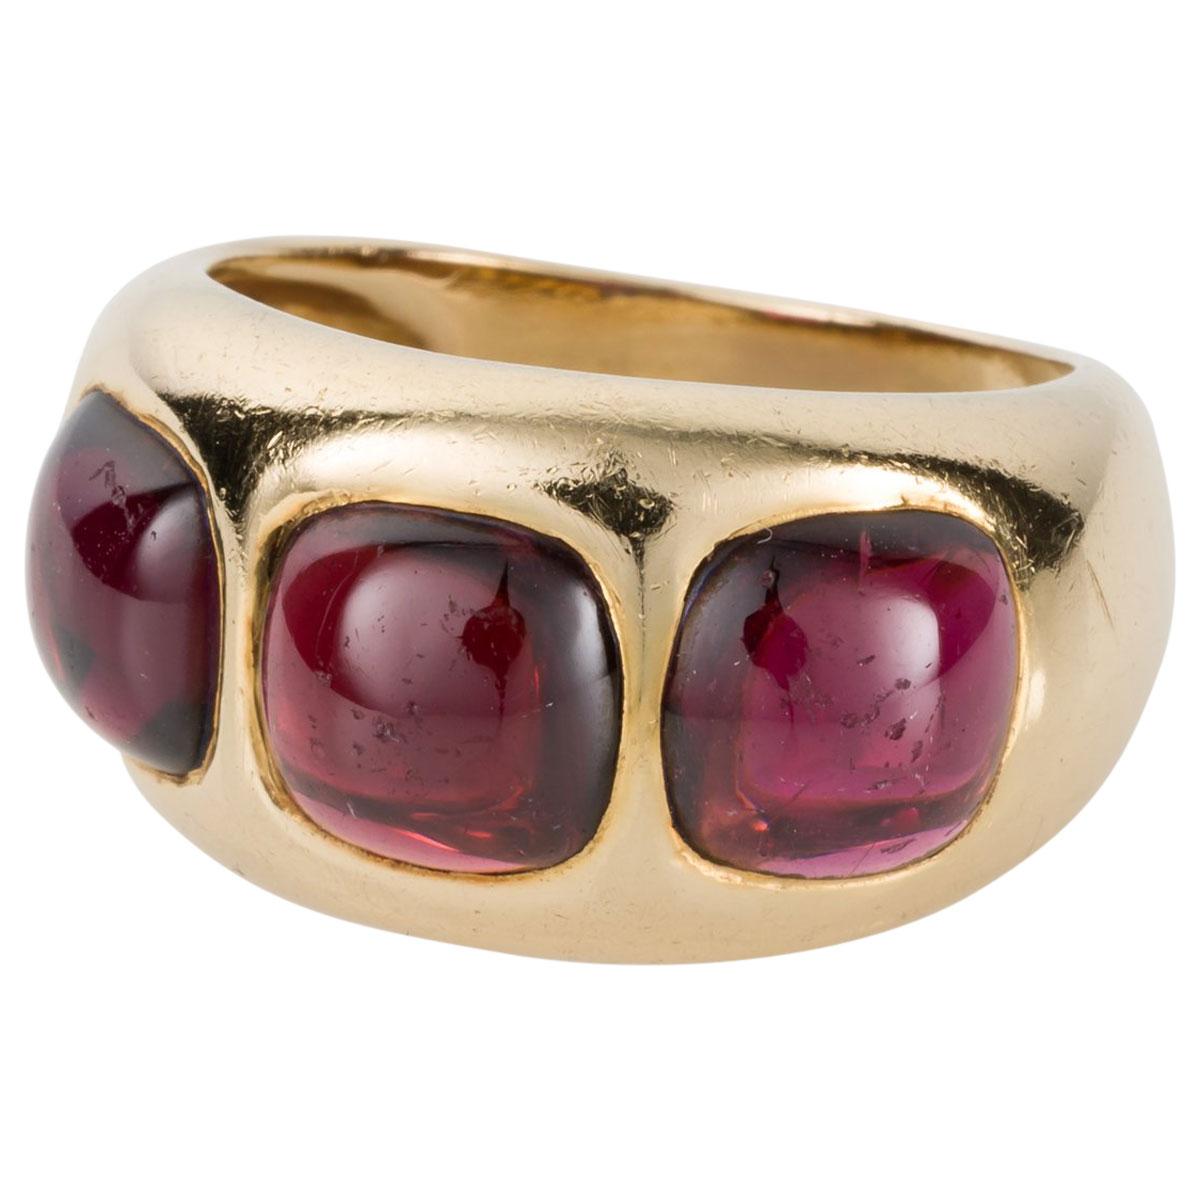 I love this ring, it's chunky and it's cool. Buttery 18k yellow gold with a soft patina outlines these gorgeous candy like cabochon garnets. They have a certain glow, a deep red tone in some directions when the light hits the top of the gemstone to